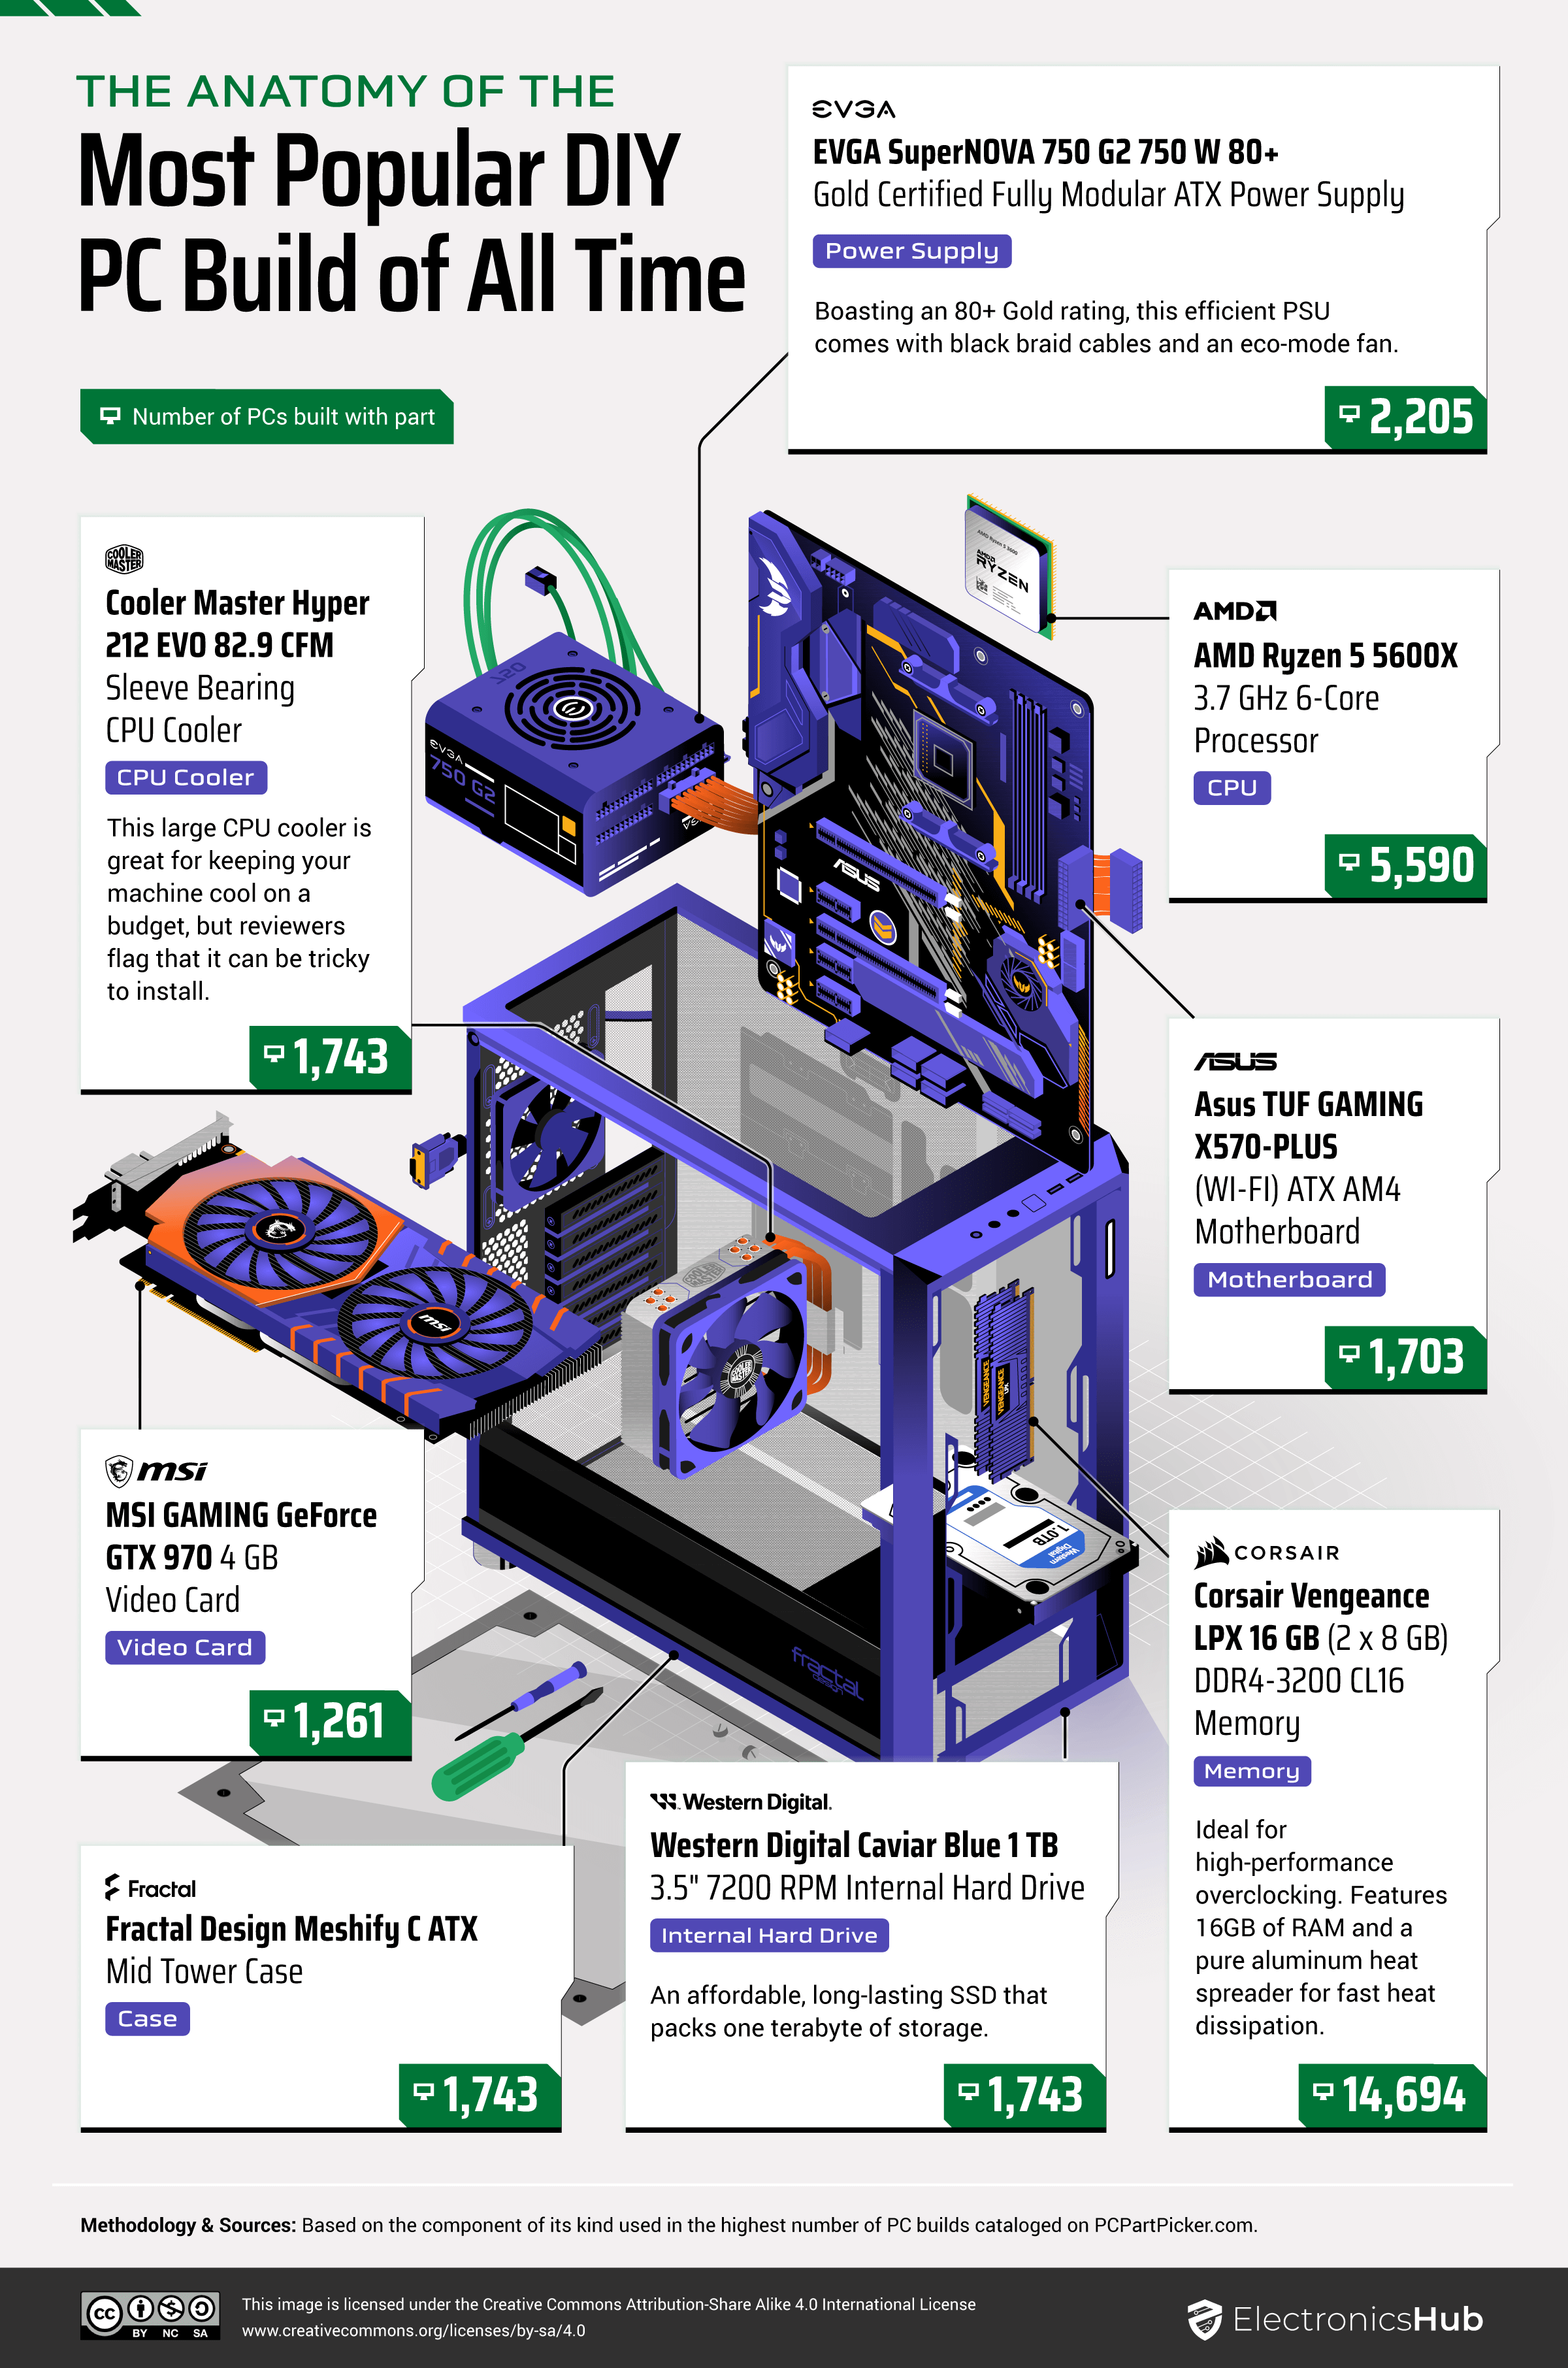 Autotruckpartsoutlet.com 03_The-anatomy-of-the-average-DIY-PC-build The Highest Rated Computer Parts, According to People Who Build PCs  